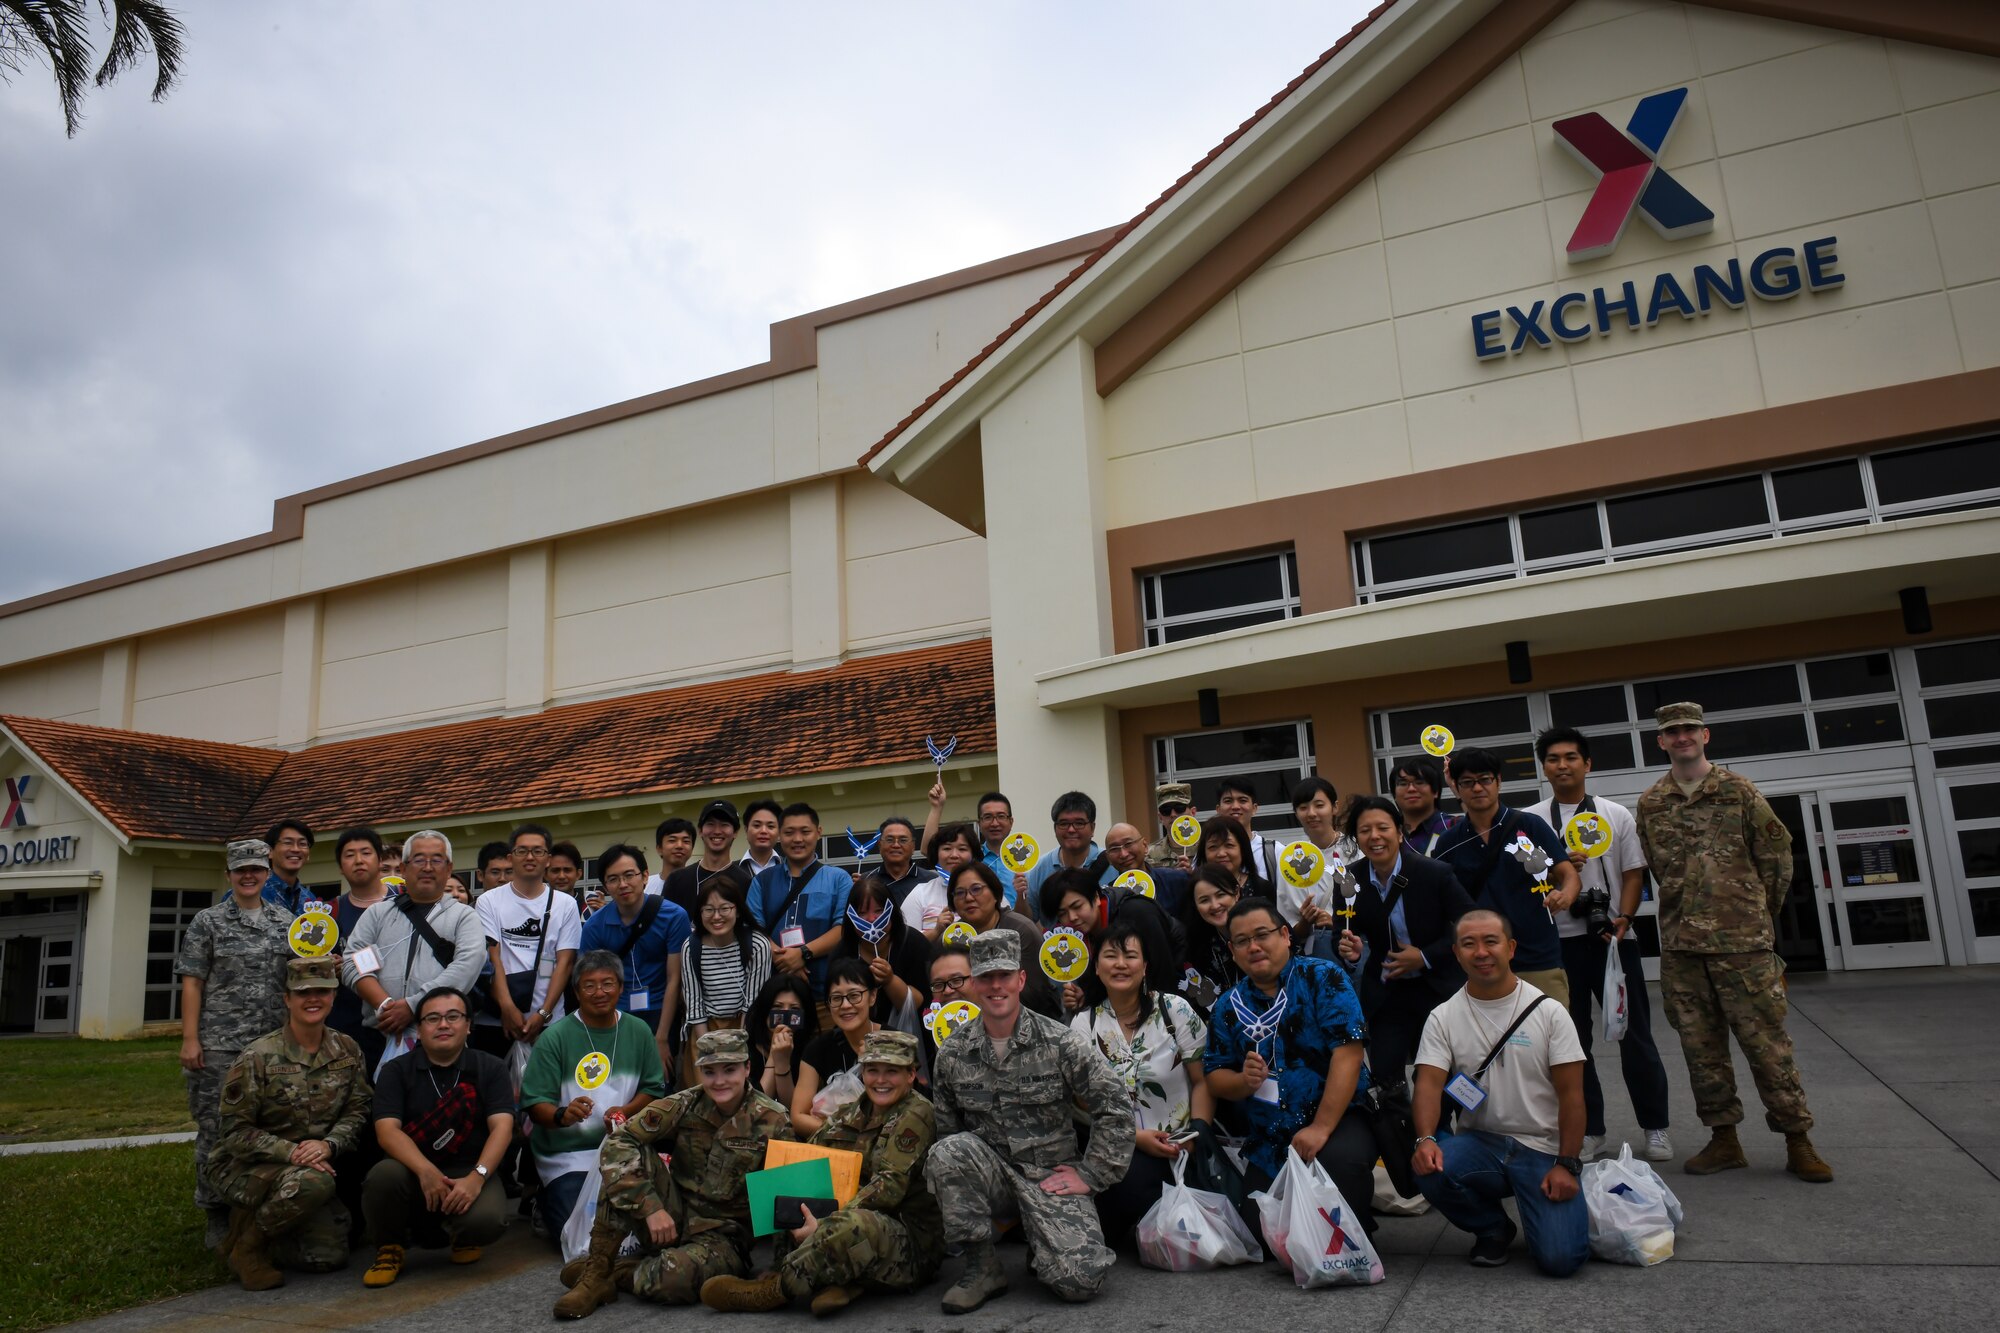 Members from 18th Wing Public Affairs and Twitter Tour visitors pose for a photo in front of the Exchange on Kadena Air Base, Japan, Nov. 4, 2019. During the tour, visitors learned about the 18th Wing misison, security forces partnerships with the Okinawa Prefectural Police, how the base maintains good stewardship of the environment, and Kadena-based aircraft. (U.S. Air Force photo by Staff Sgt. Benjamin Raughton)